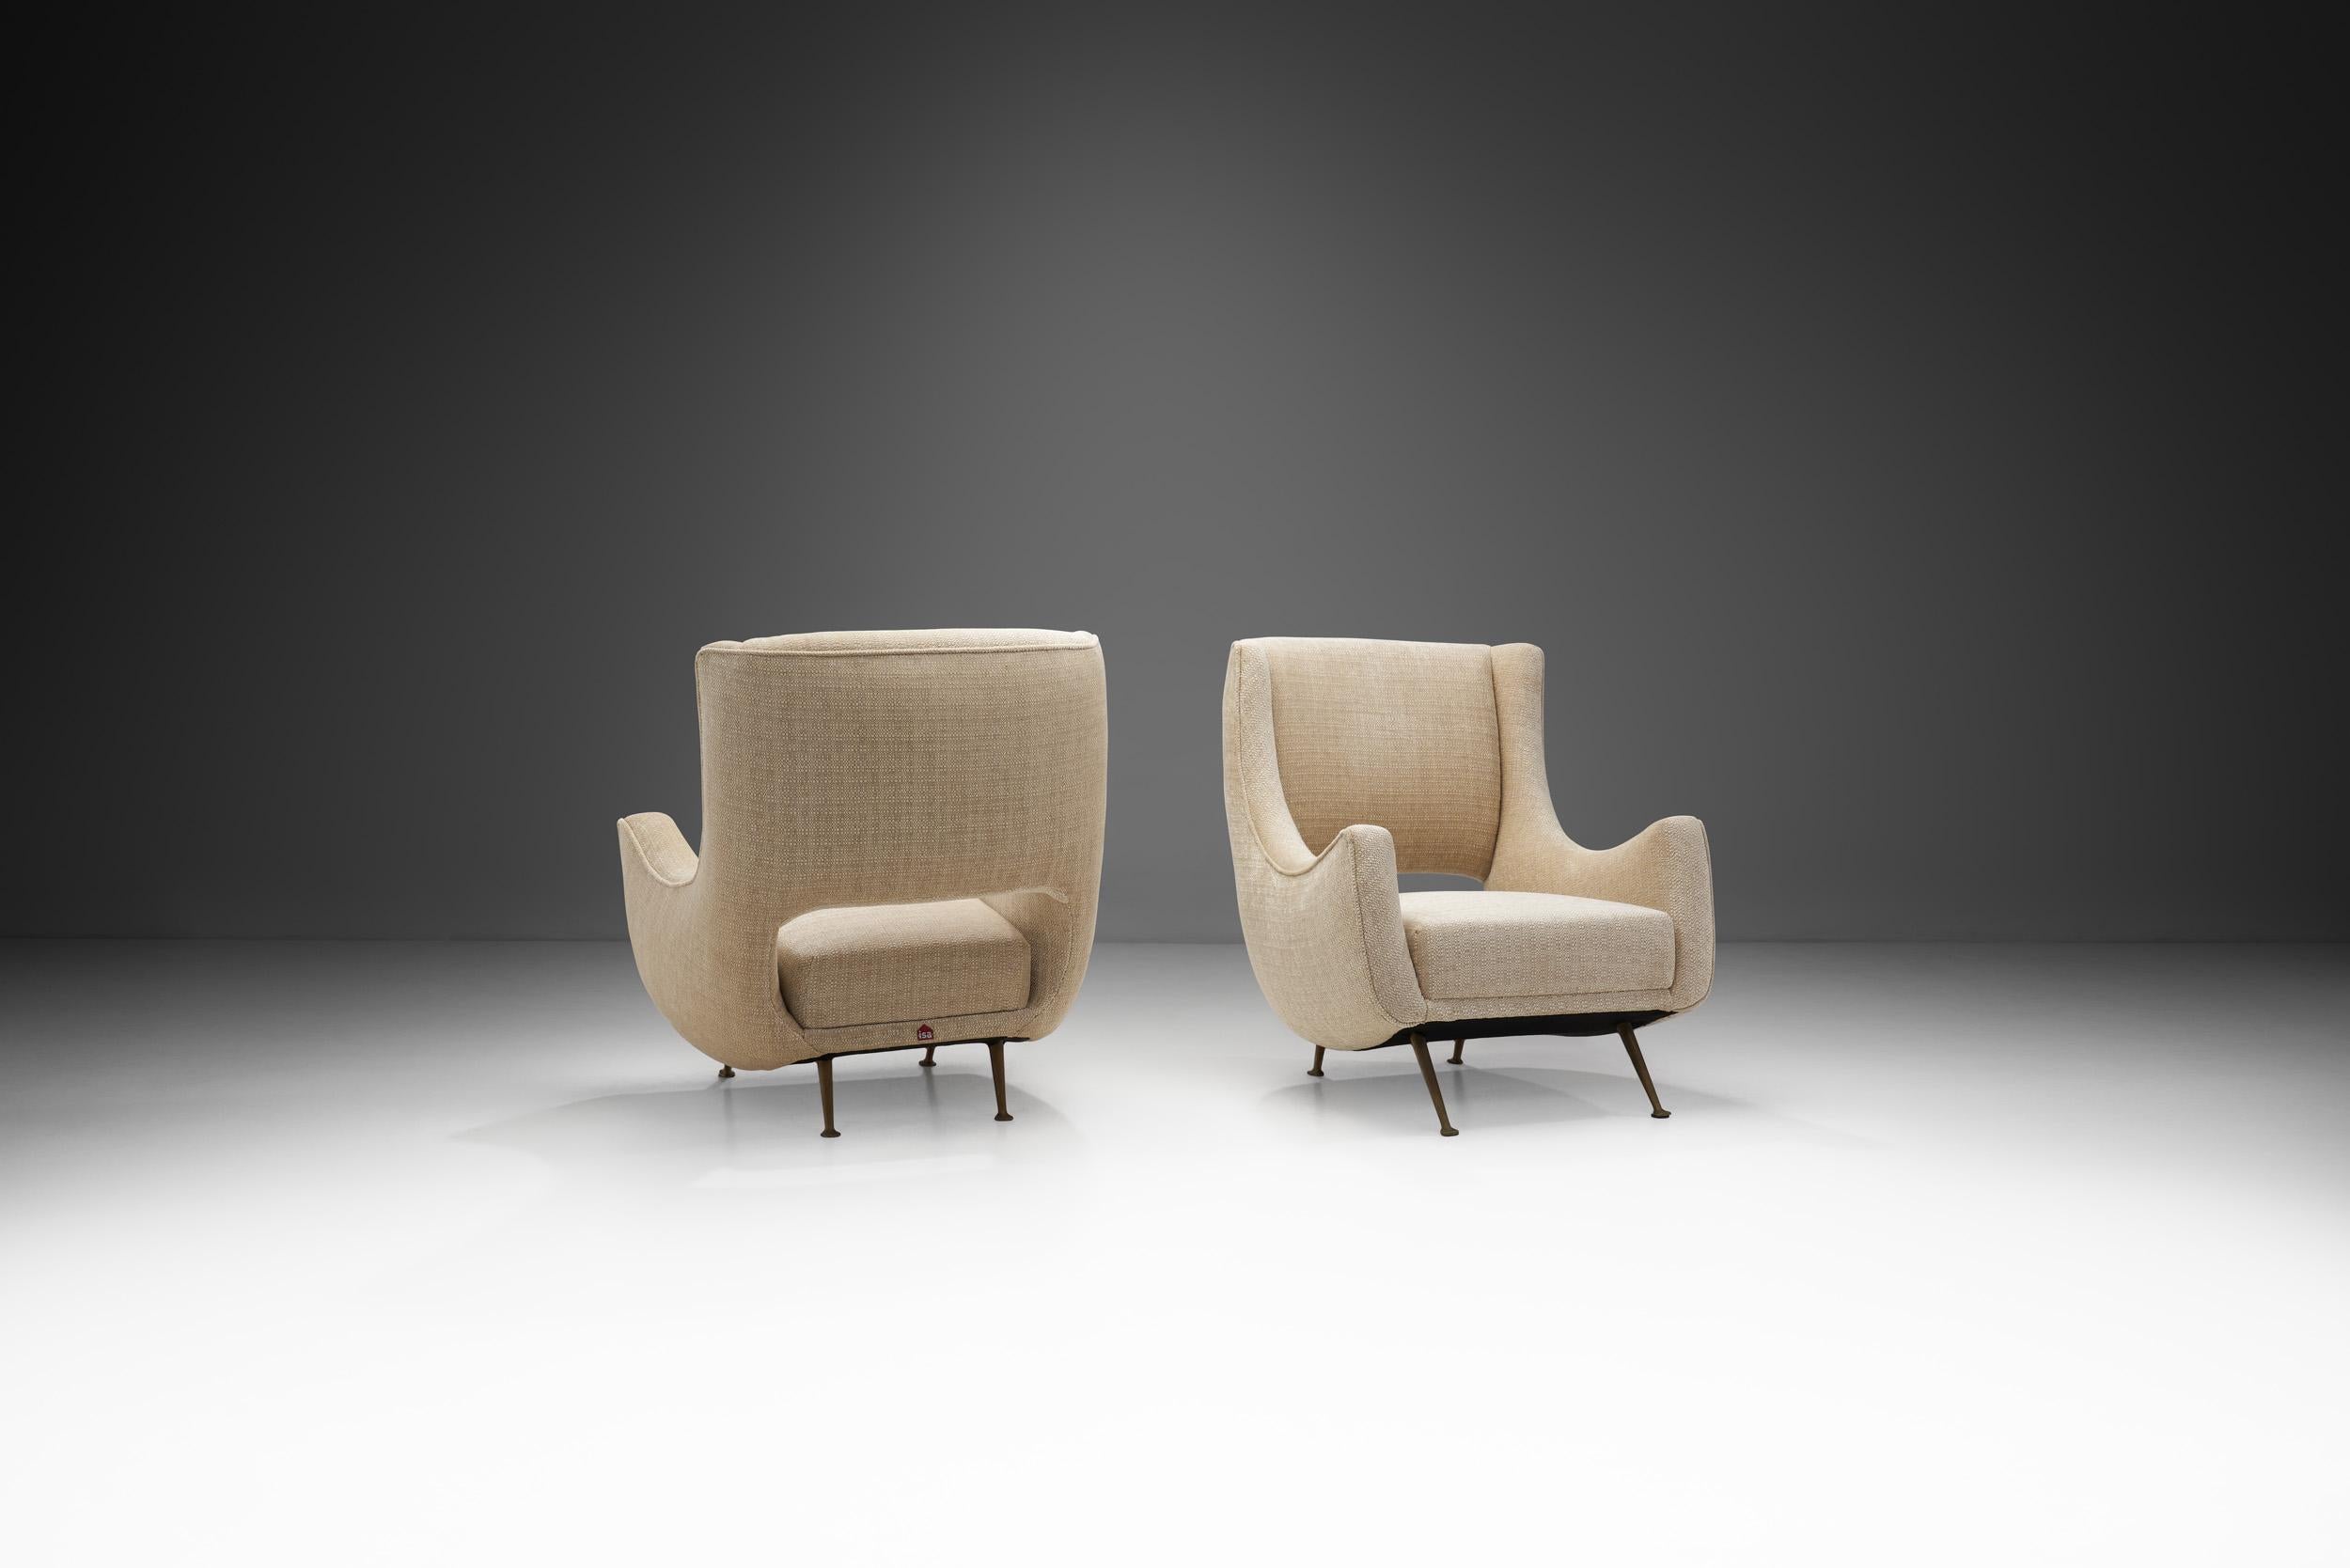 This elegant pair of rare lounge chairs was produced by ISA (Industria Salotti e Arredamenti) Bergamo in Italy during the 1950s. The company has worked with many of Italy’s largest names in design, most renowned being Gio Ponti, but even in their